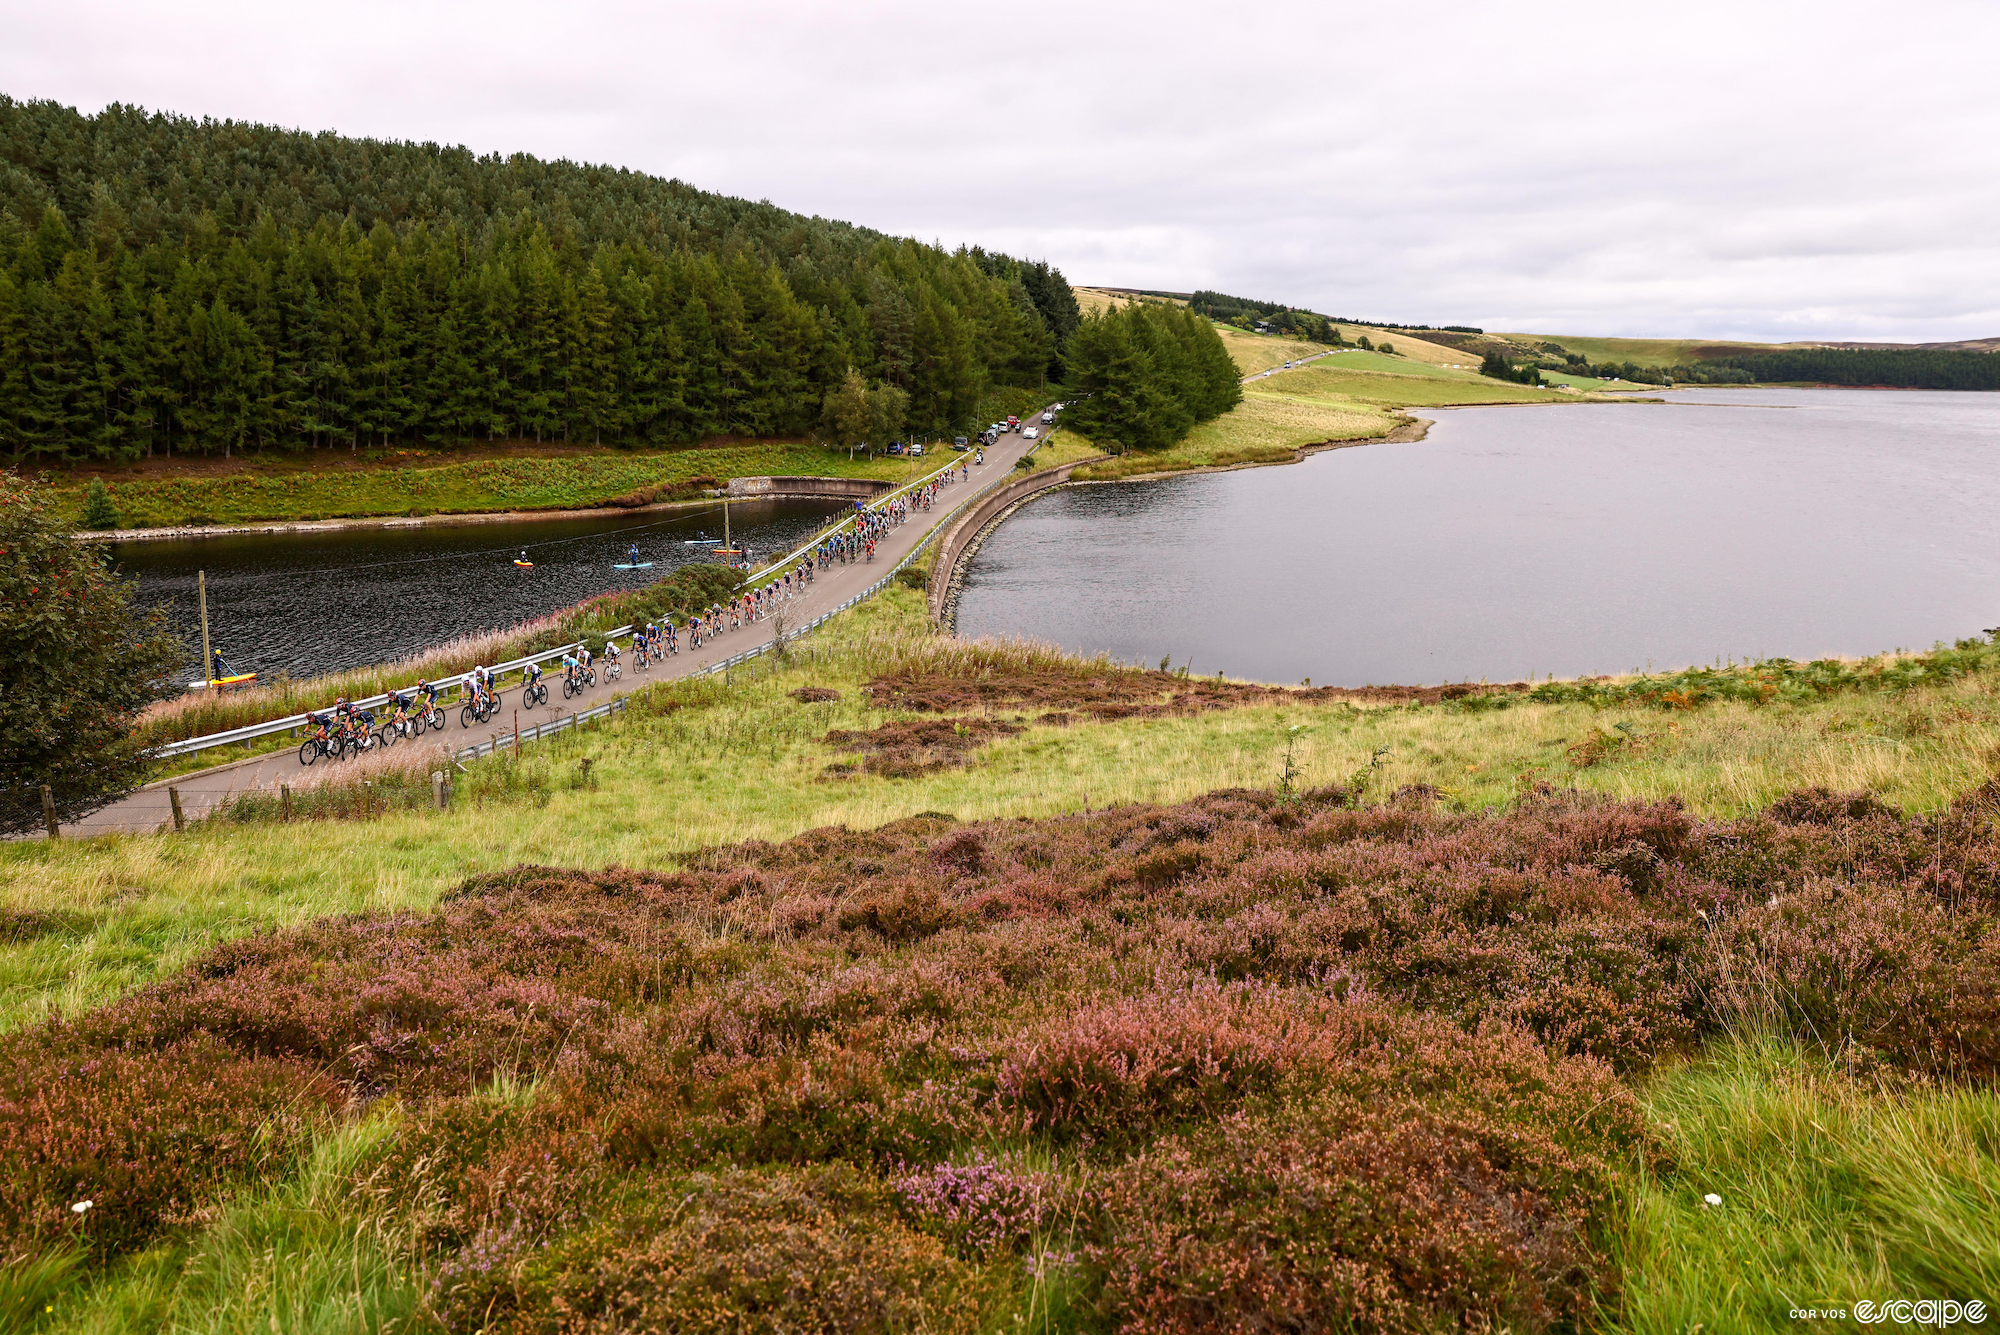 Another landscape shot of a pack of riders rolling past lush green fields and heather, over a bridge, in the Scottish countryside.